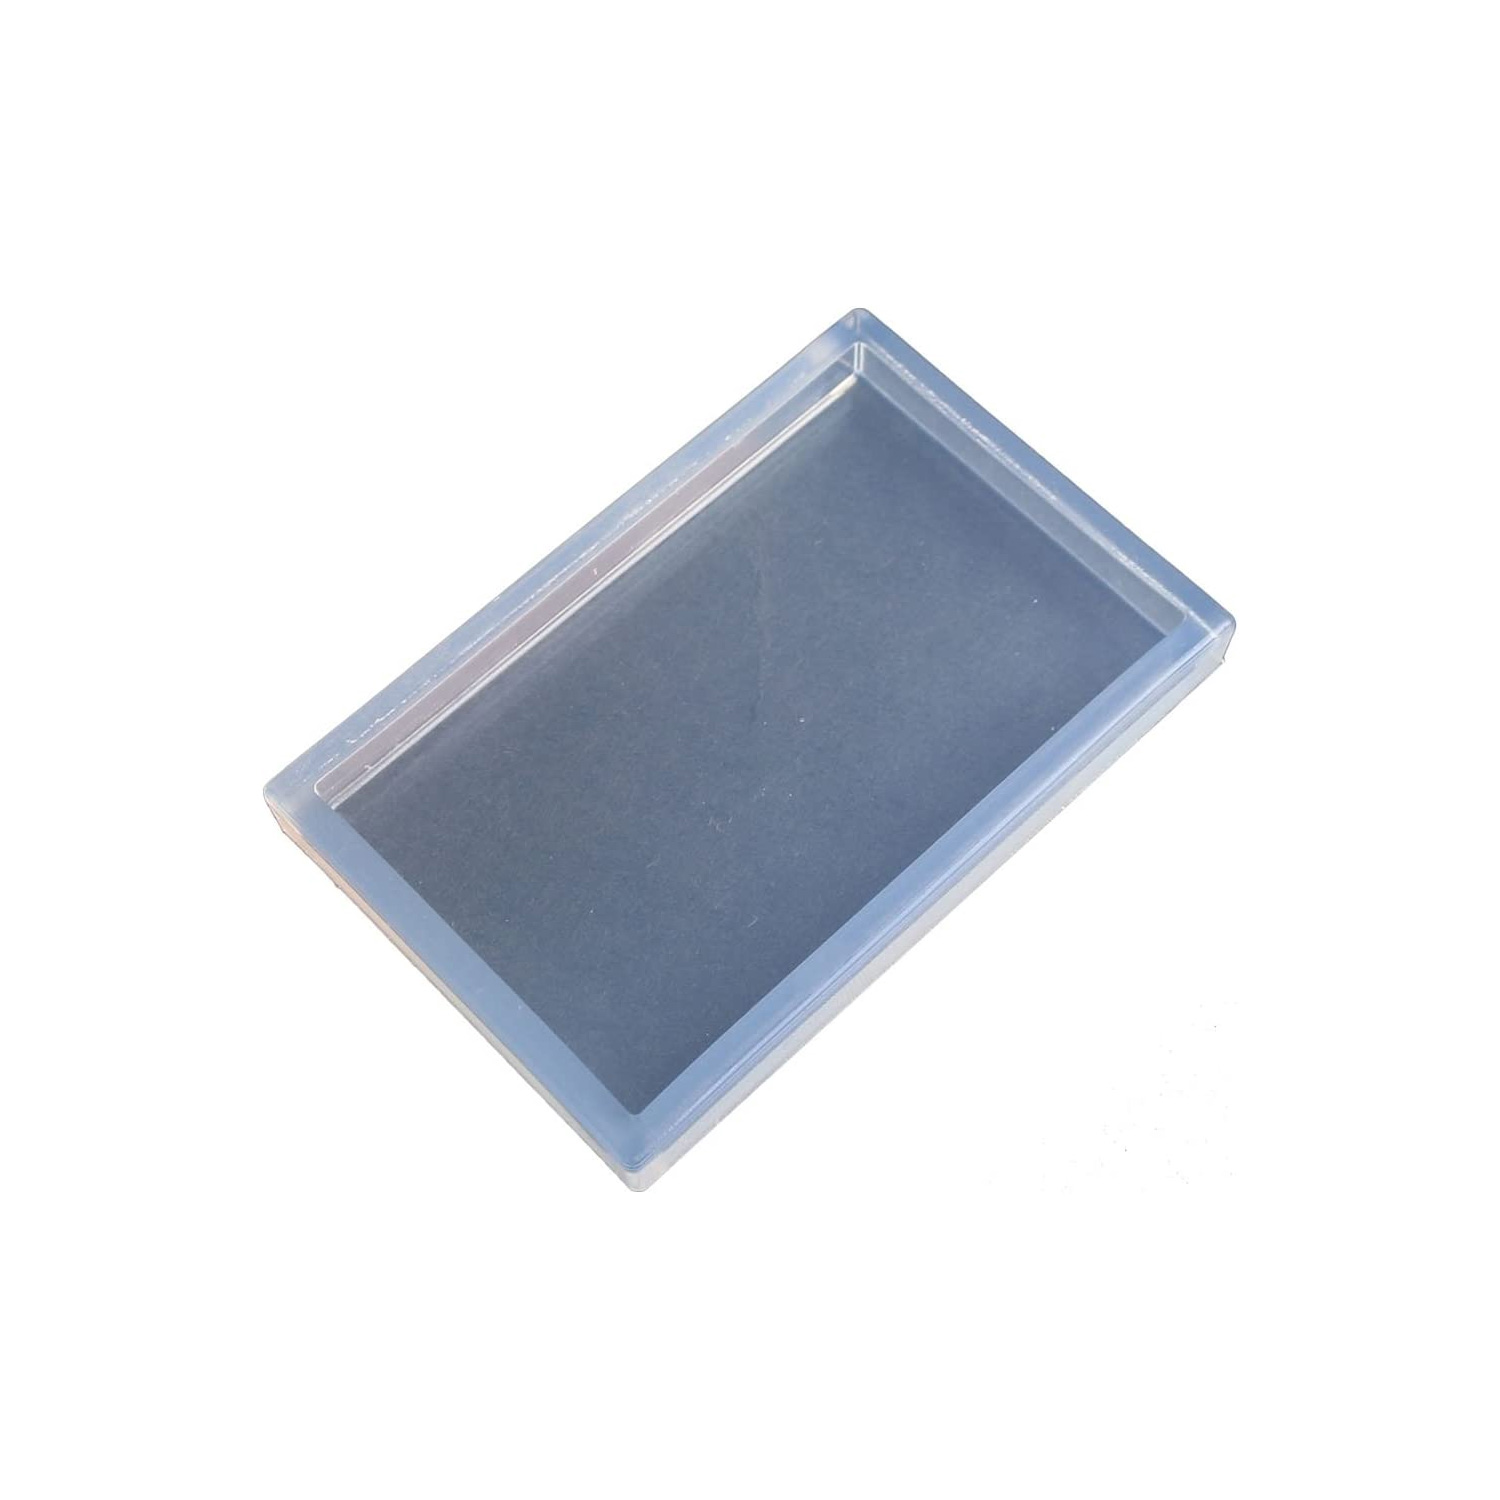 KAM-REJ-544  Resin Crafting Silicone Mold  (pcs)